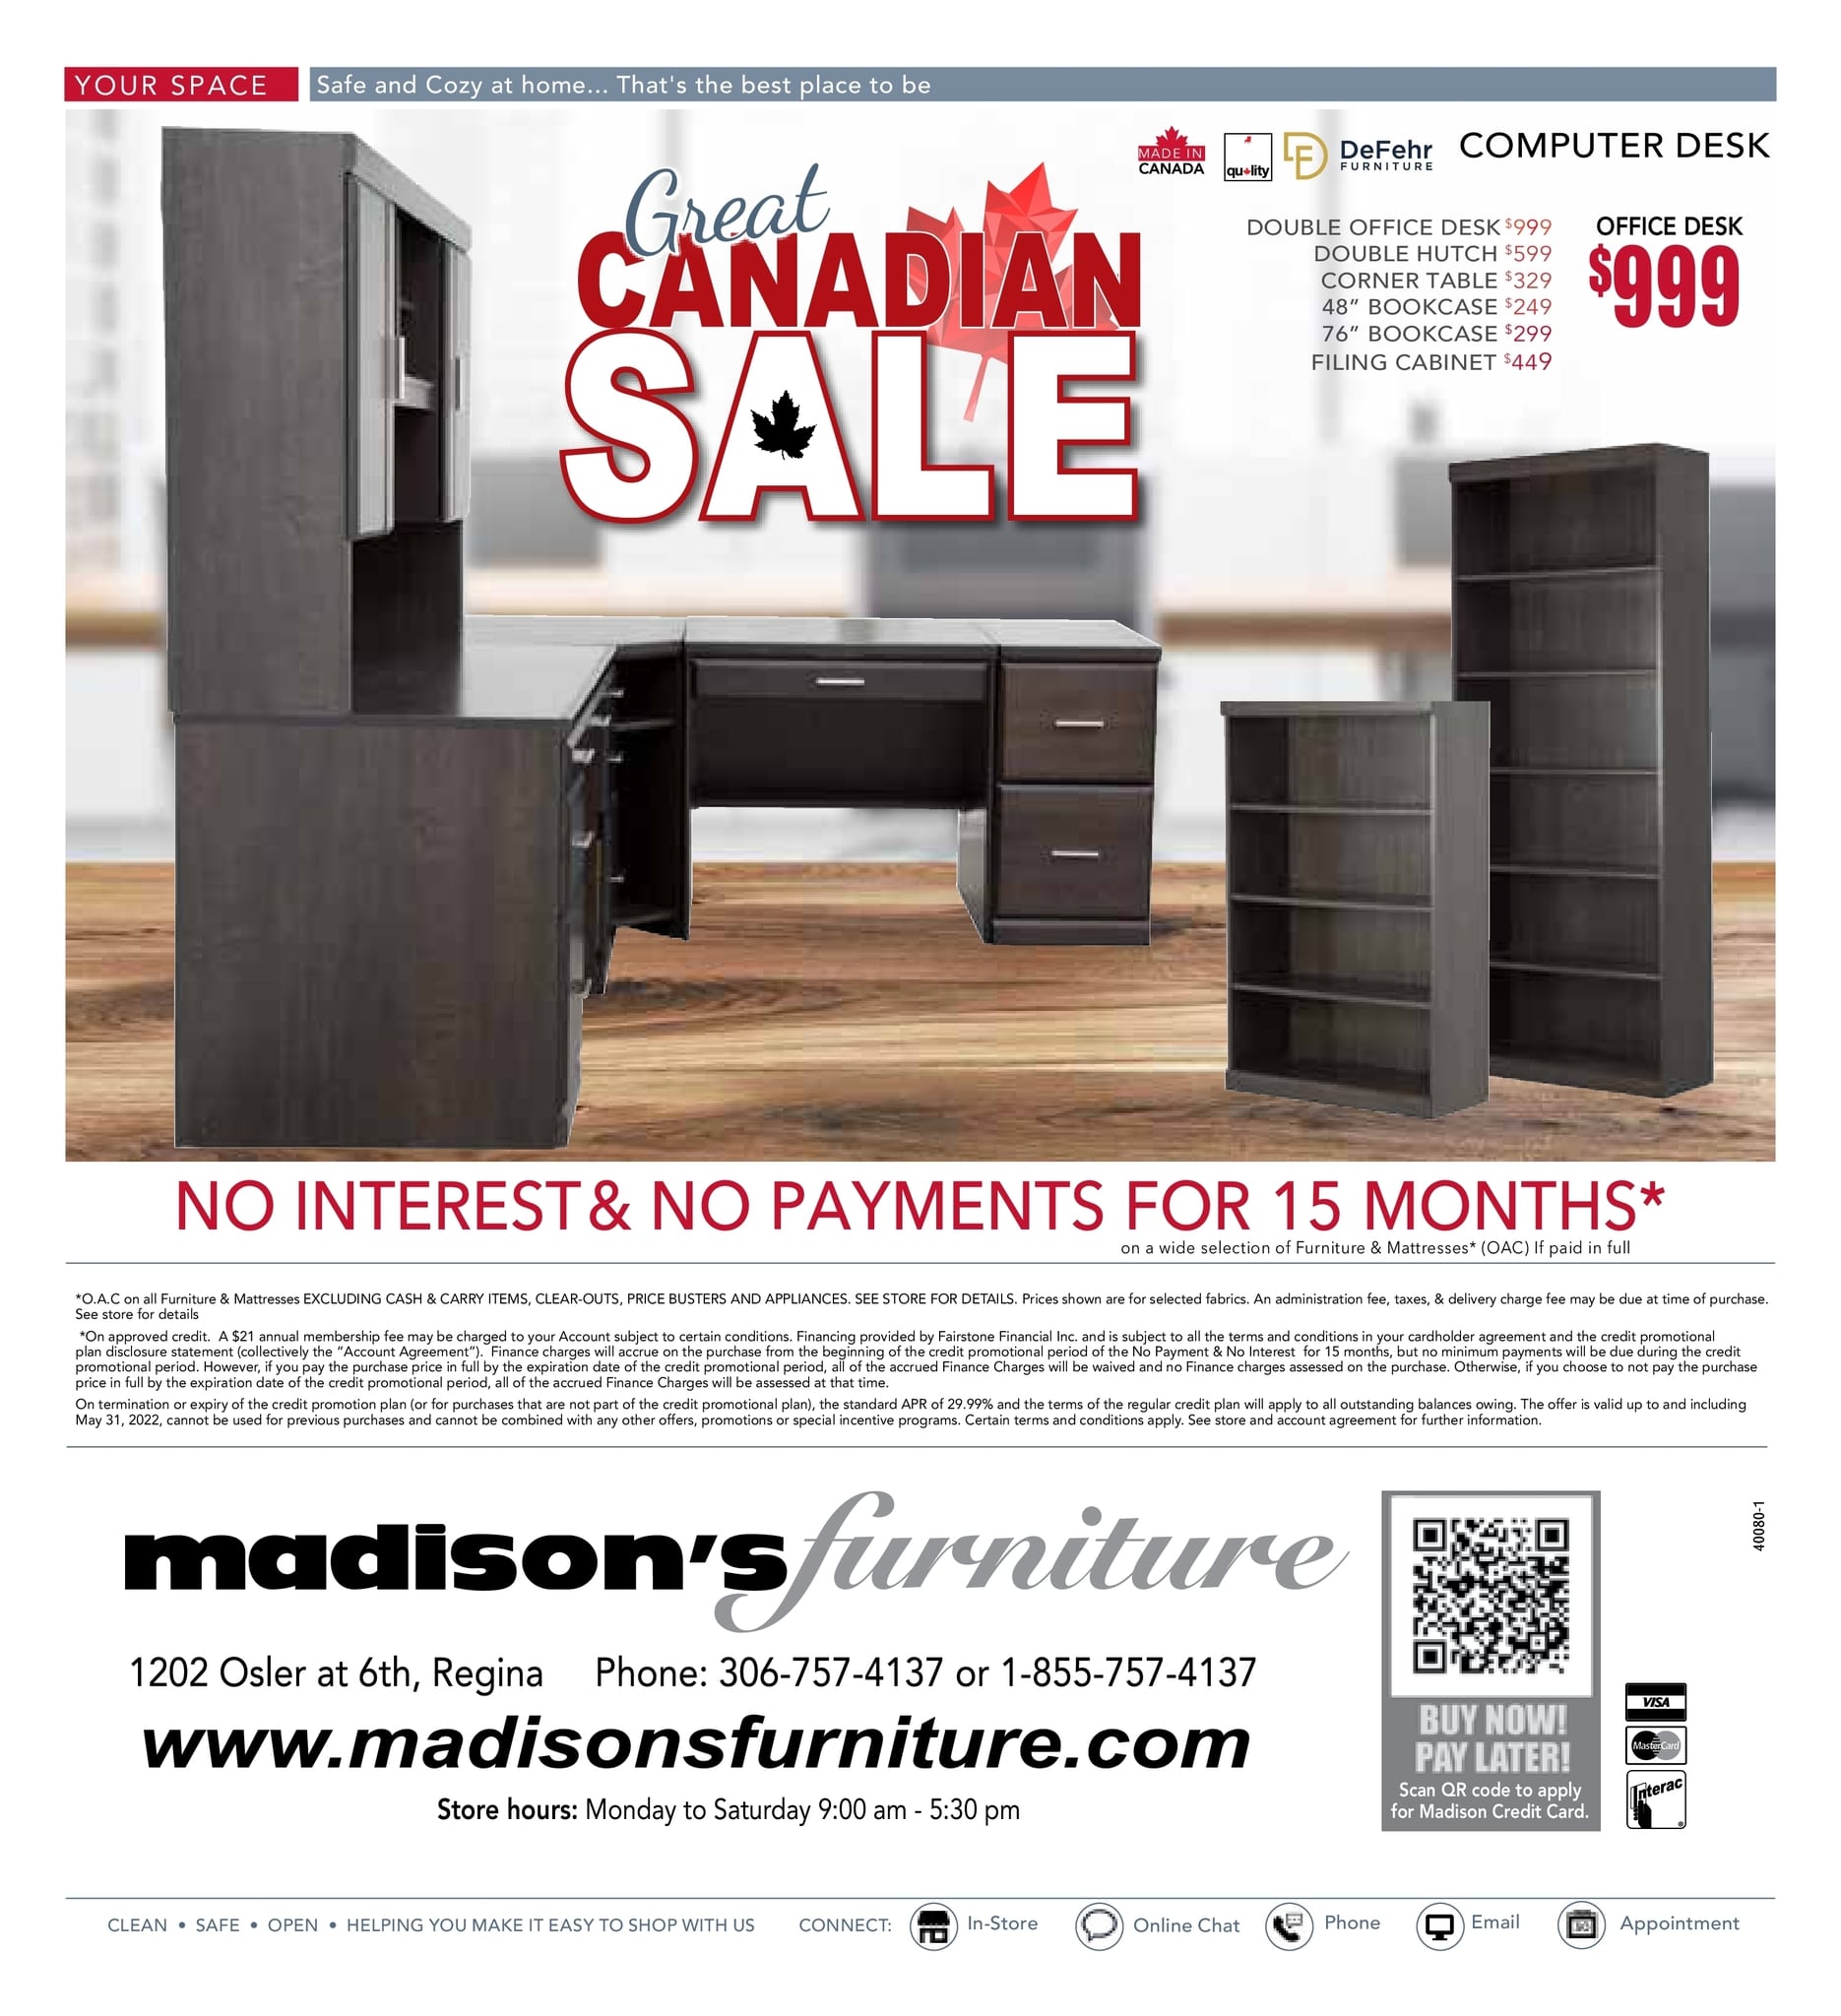 Madison's Furniture - Great Canadian Sale - Page 8